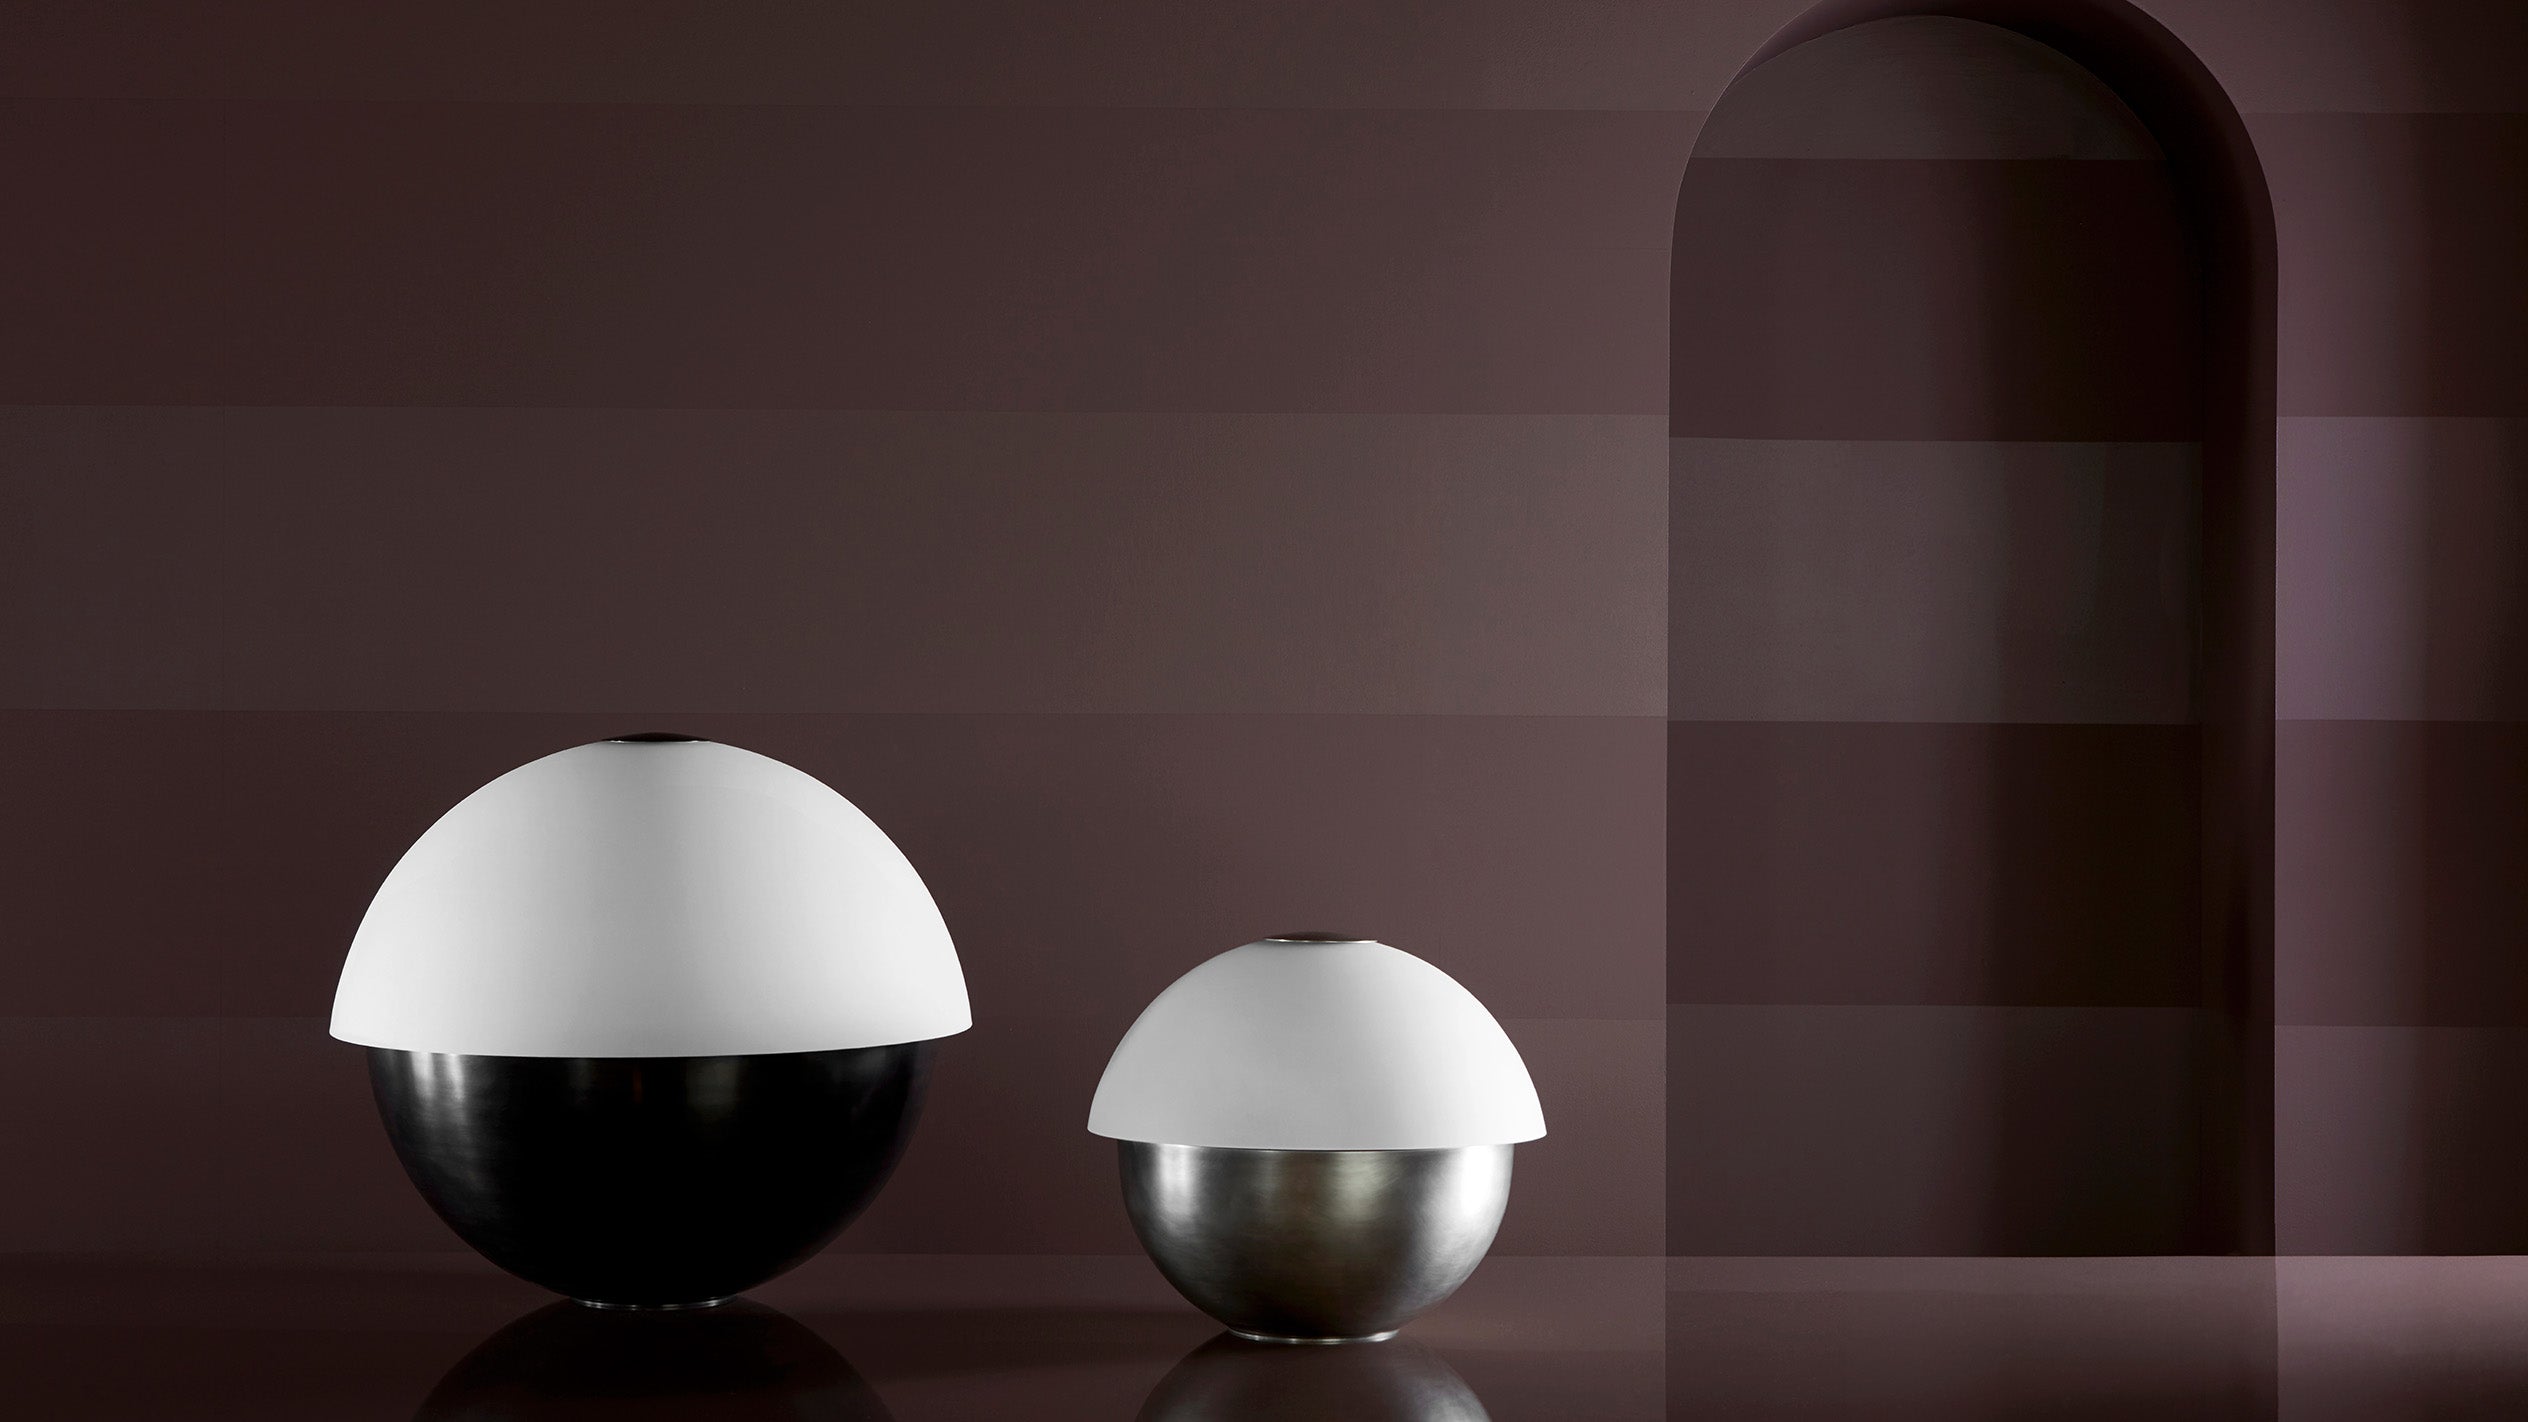 AXON : SMALL table lamp in Tarnished Silver and AXON : LARGE table lamp in Blackened Brass on a surface.